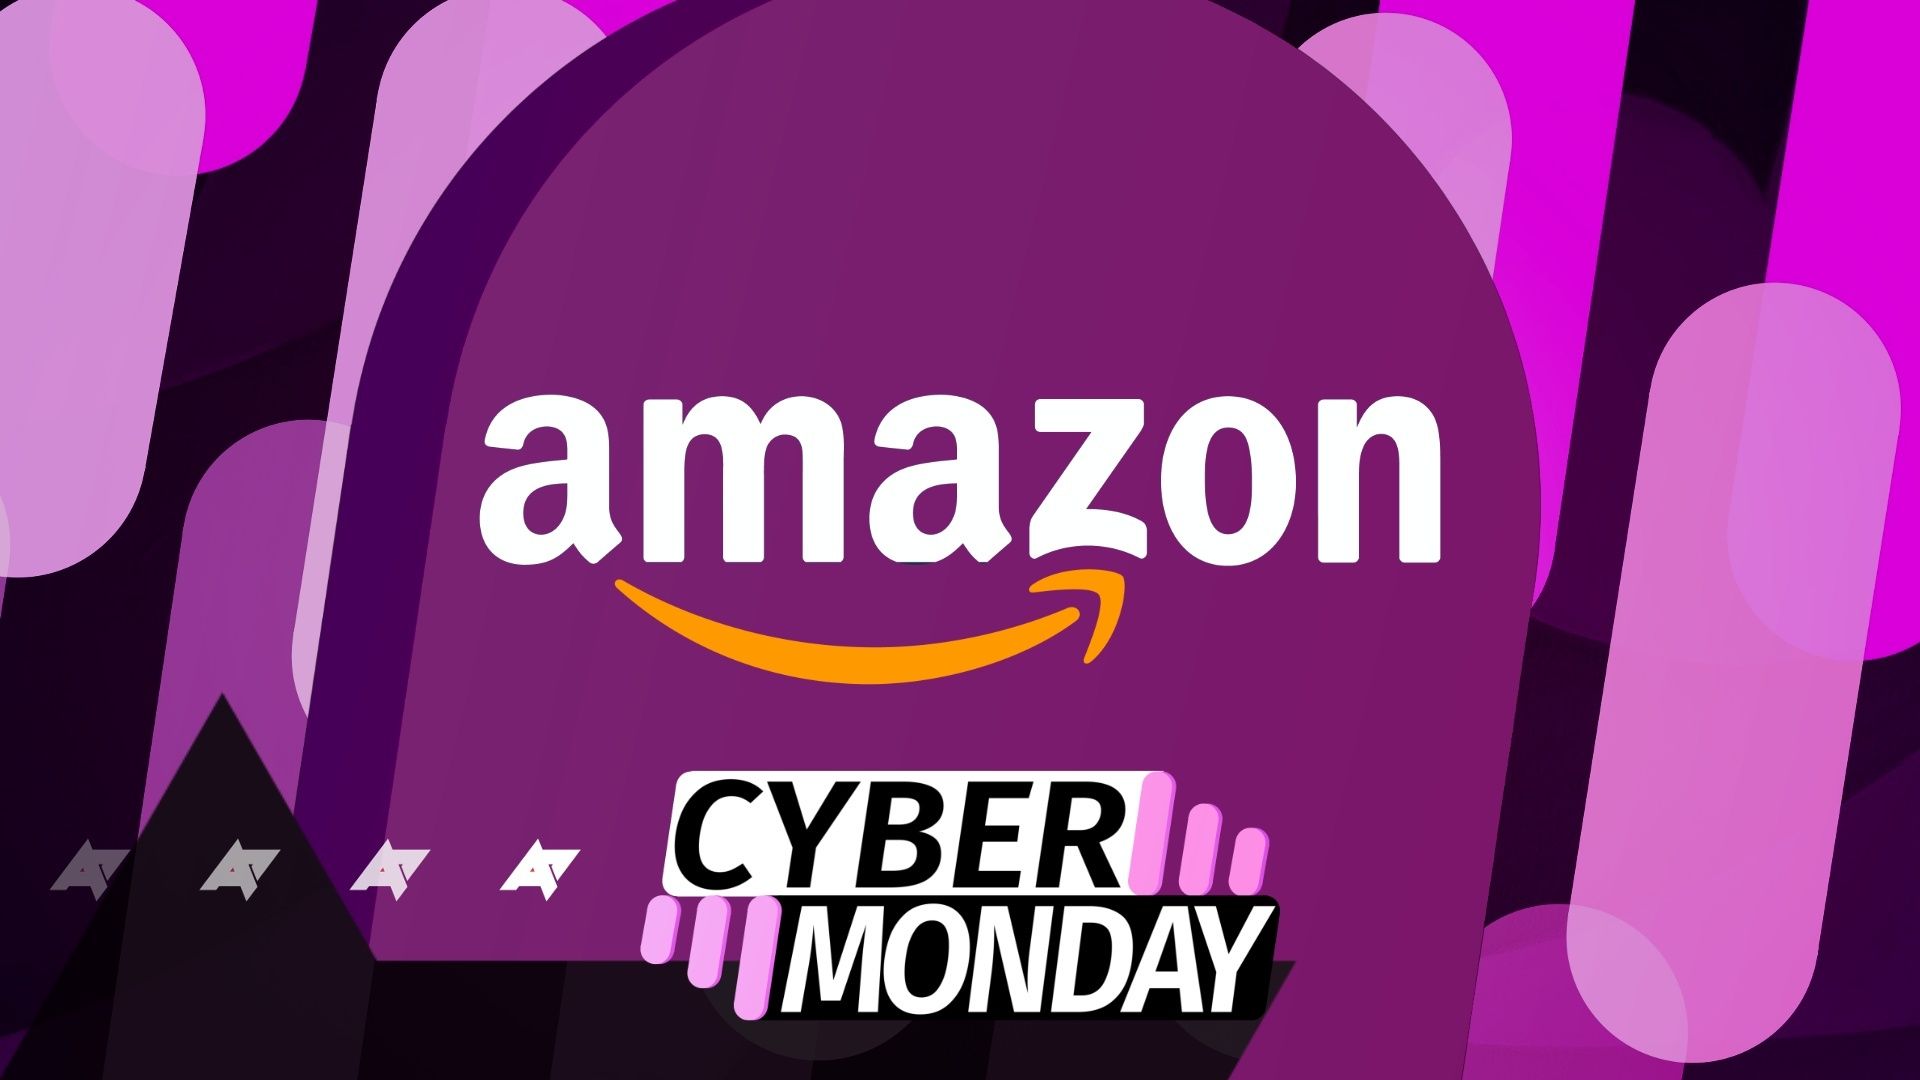 The Amazon logo on a purple background with a Cyber Monday logo below